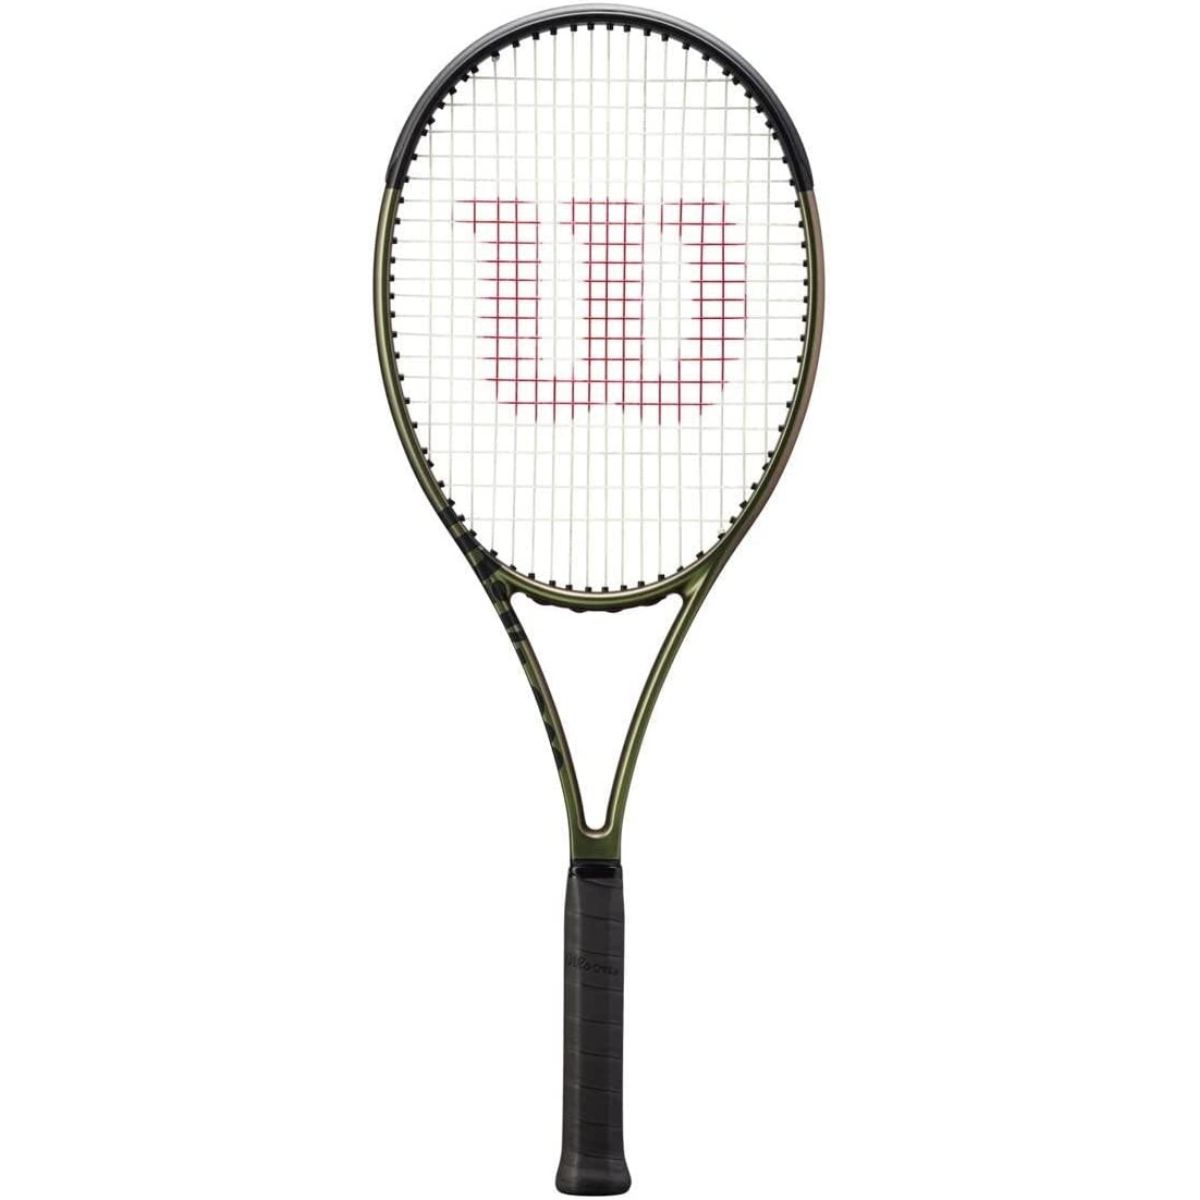 The Best Tennis Rackets for Control Options: Wilson Blade 98 18×20 v8